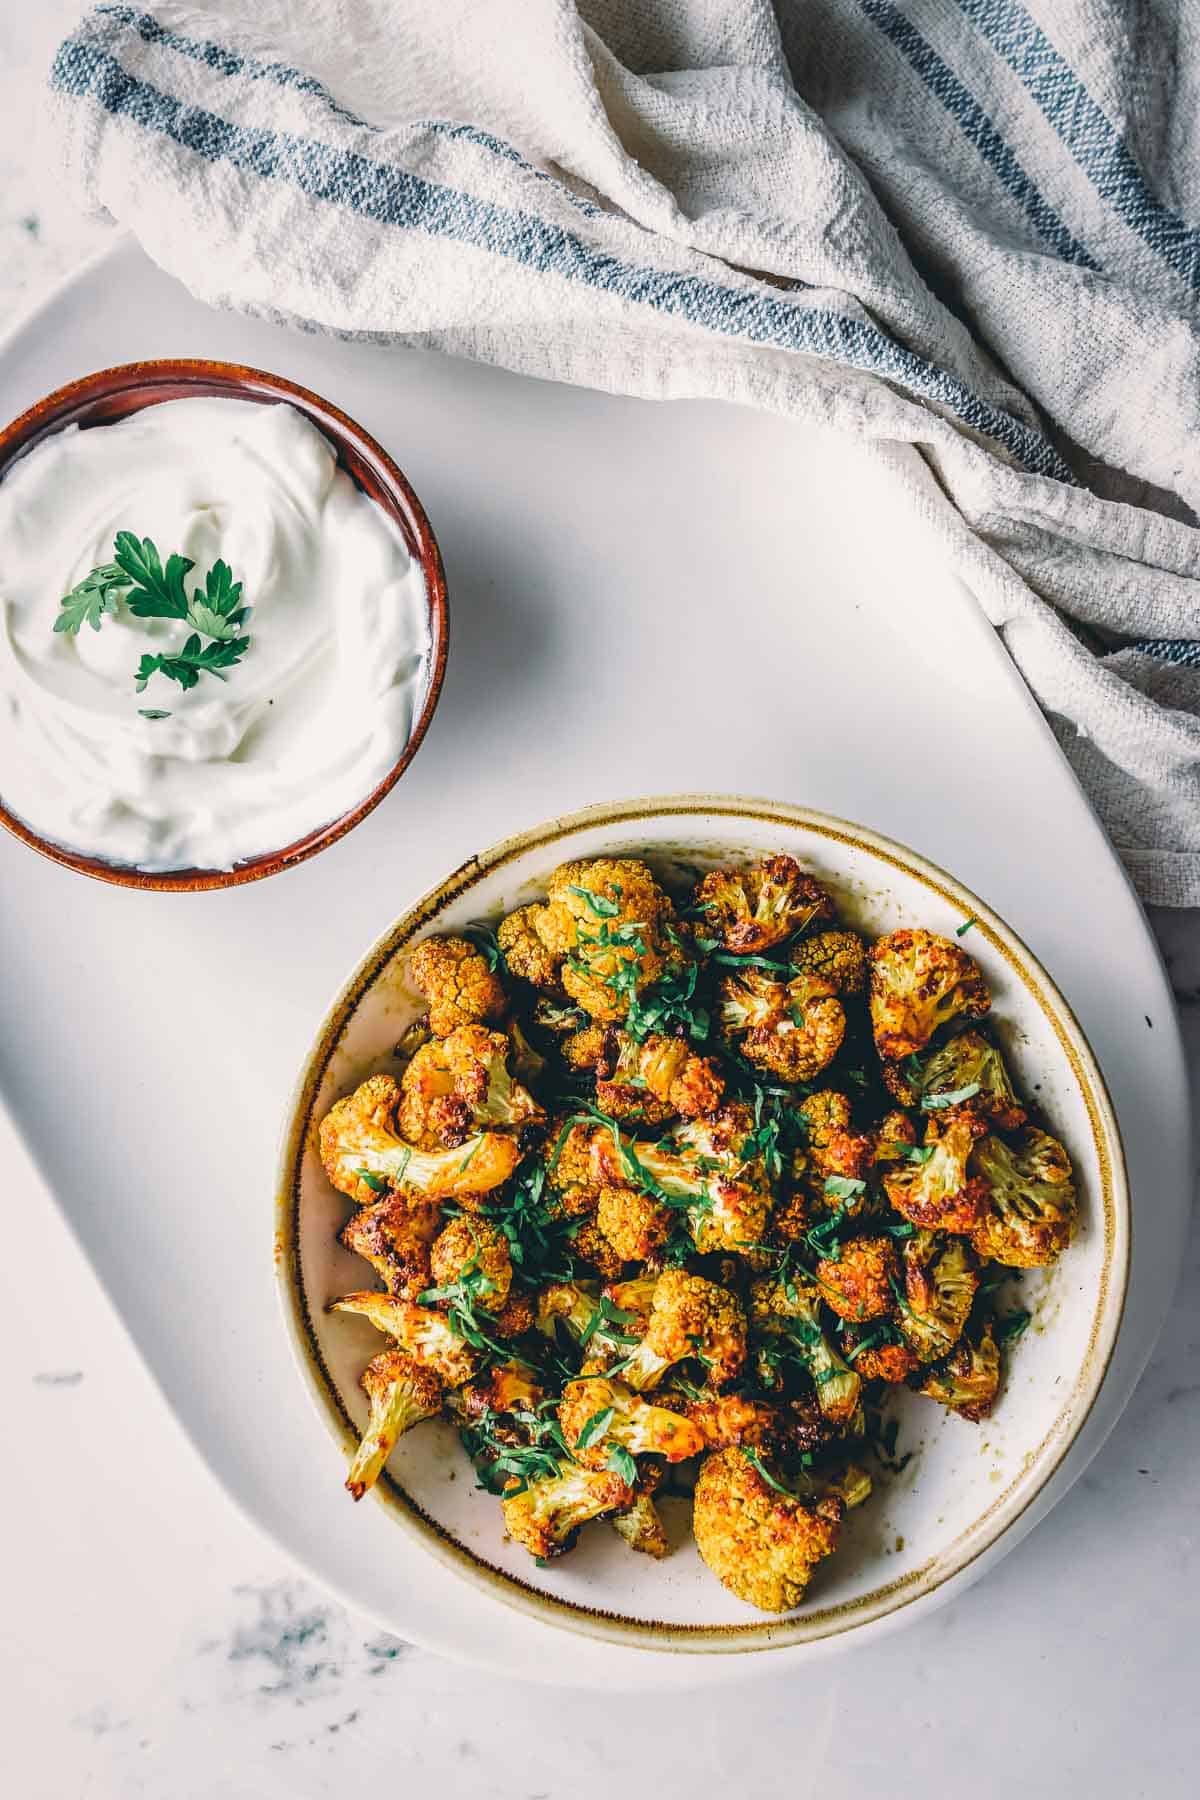 Cauliflower florets in a bowl with yogurt and sour cream.